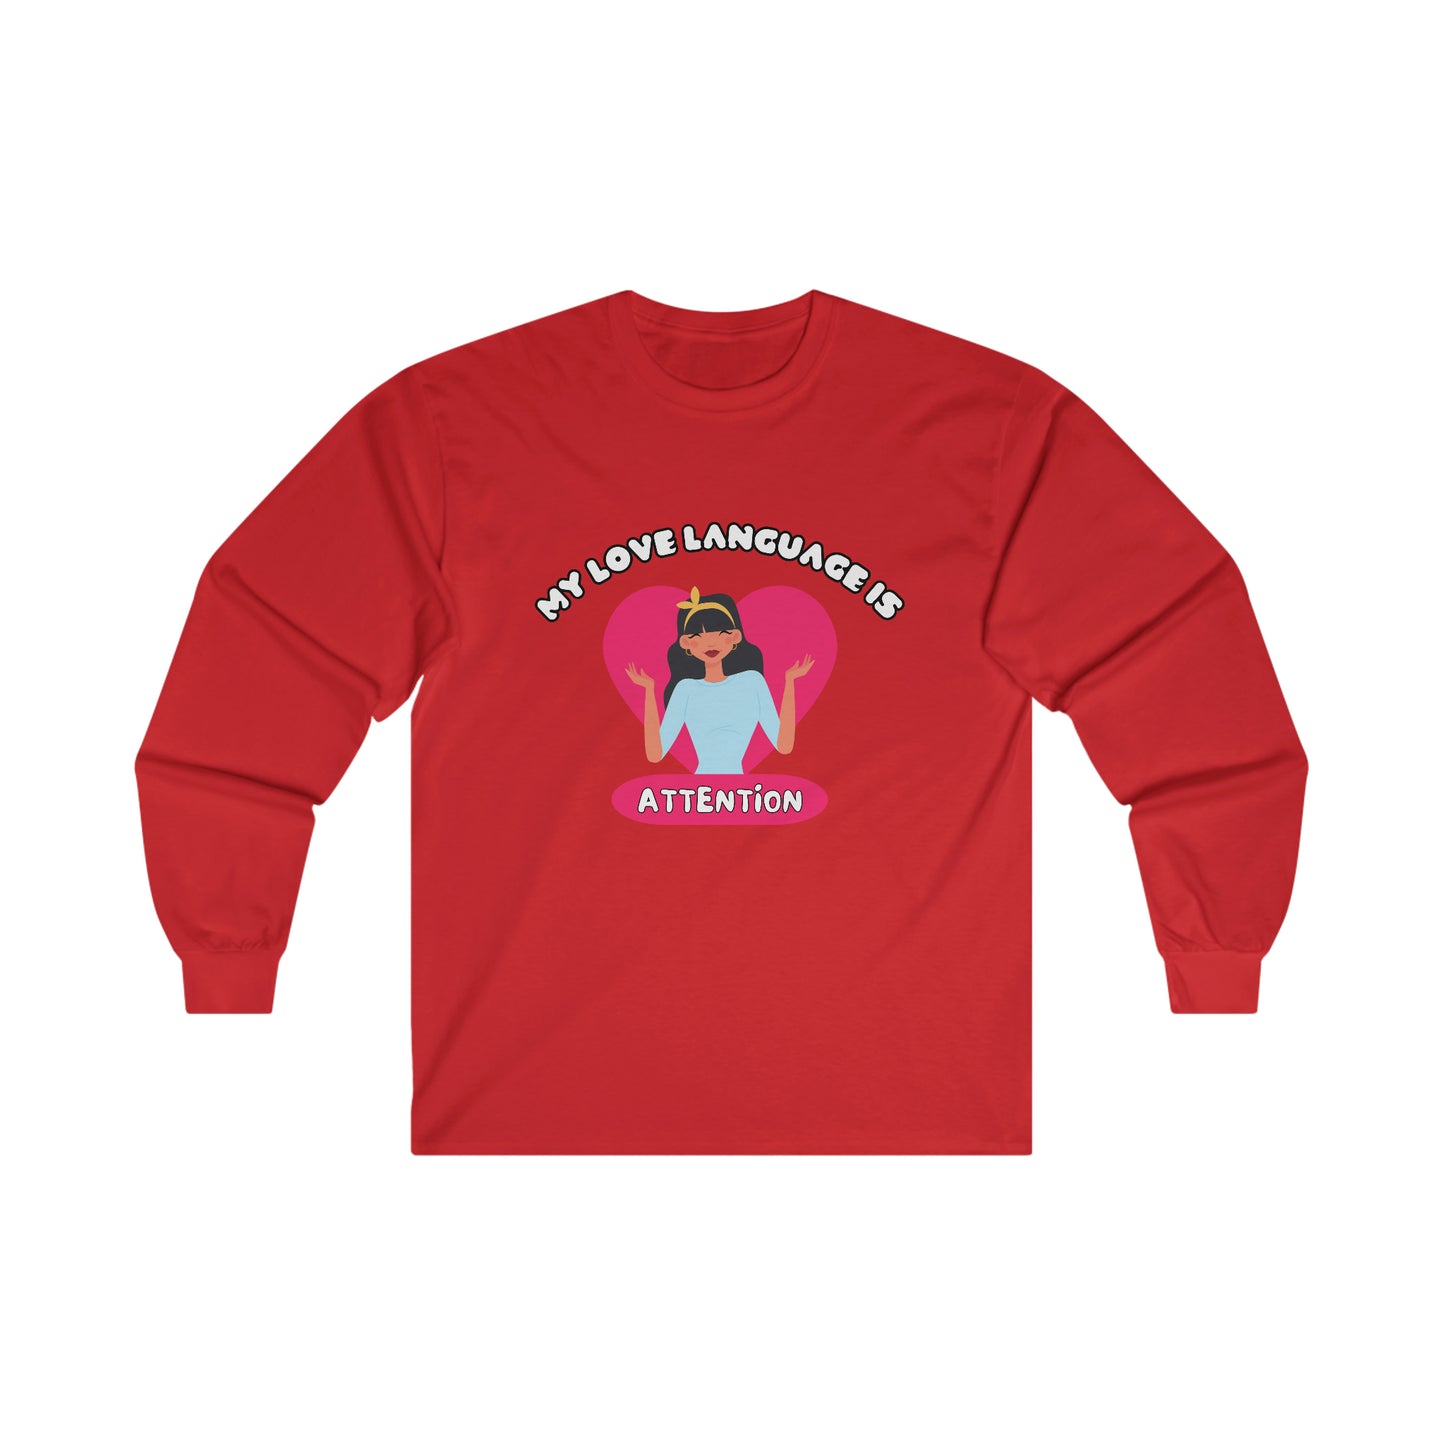 My Love Language Is Attention - Unisex Long Sleeve Tee